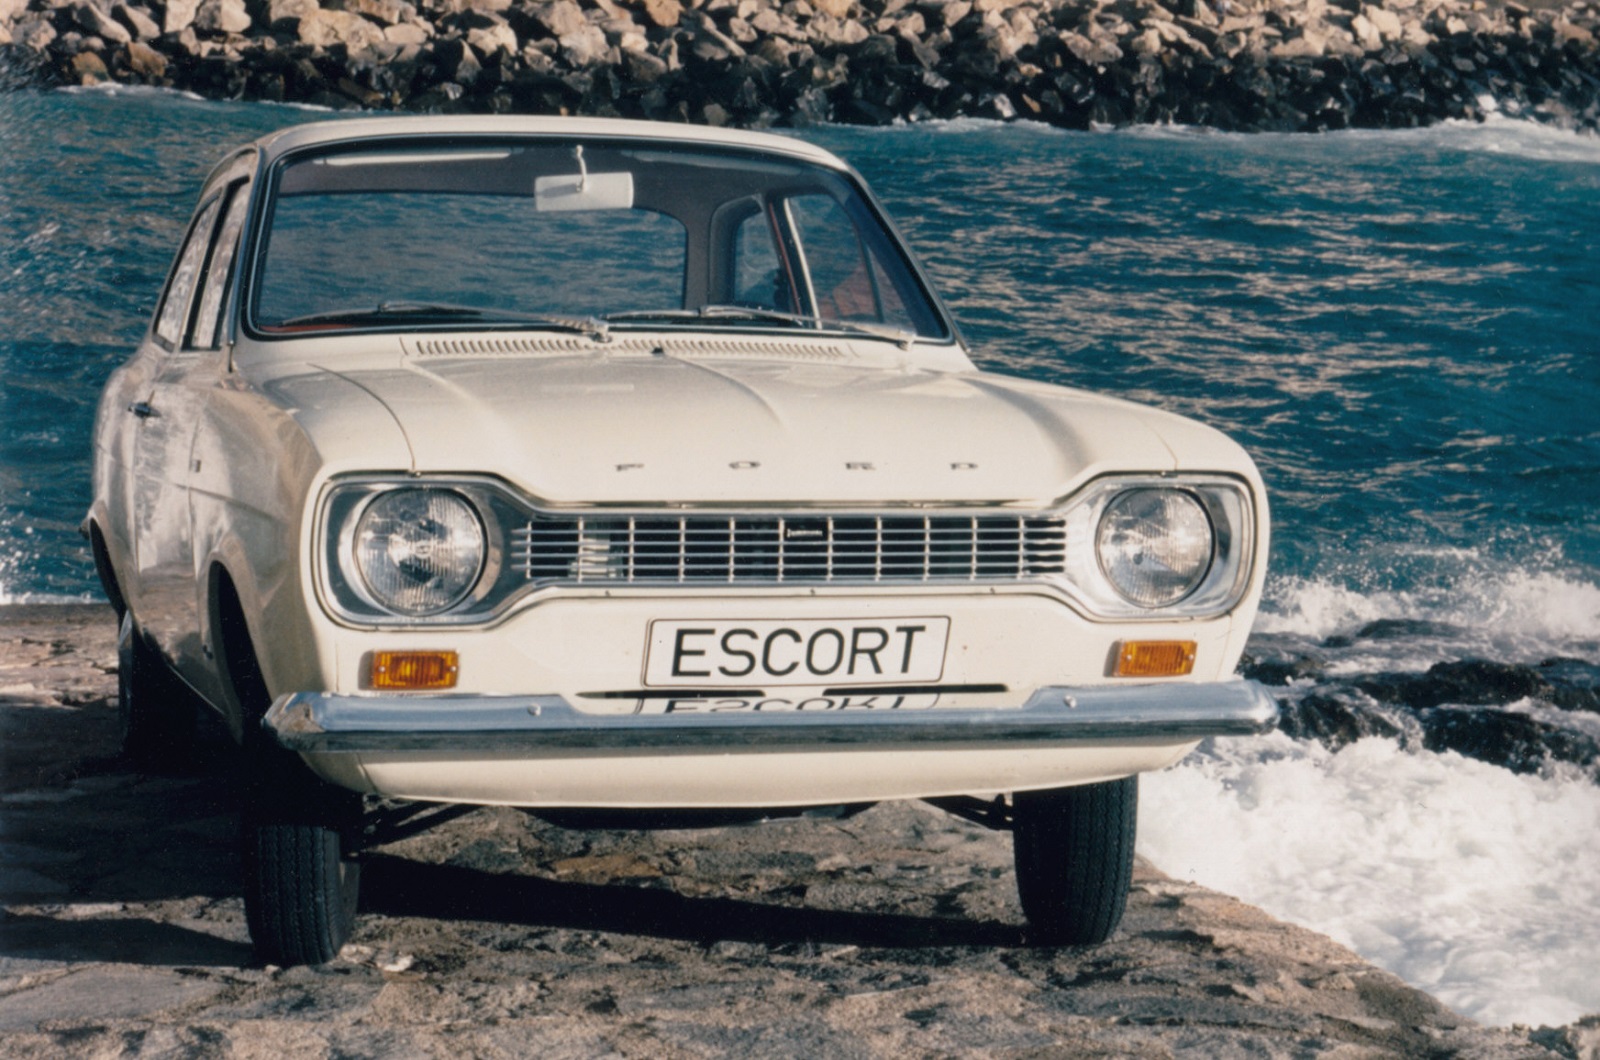 <p>Ford first used the Escort nameplate in <strong>1955</strong> on an estate variant of the Anglia 100E, but the designation didn’t denote a standalone model until <strong>1967</strong>. Launched to replace the Anglia, the first-generation Escort was a hugely significant car because it was developed by Ford of Europe, rather than by its British or its German division. It was built in both countries with minor market-specific differences starting in <strong>1968</strong>.</p><p>The original Escort range covered a stunningly broad spectrum, from wallet-friendly economy-oriented models to high-performance rally-bred variants, and it quickly became one of the best-selling cars in the UK. Ford sold <strong>103,817 units</strong> in <strong>1975</strong>, putting the model in second place behind the Cortina (<strong>106,787 sales</strong>). Most of the subsequent generations enjoyed a similarly high level of popularity; the Escort was the UK’s best-seller in <strong>1985</strong> (<strong>157,269 units</strong>) and again in <strong>1995</strong> (<strong>137,760 sales</strong>). Production for the European market ended in 2002, when the Escort finally passed the torch to the first-generation Focus released four years earlier.</p><p>Ford resurrected the Escort nameplate on the Chinese market in 2015. Not sold outside of its home country, the made-in-China Escort is somewhat ironically based on the second-generation Focus.</p>